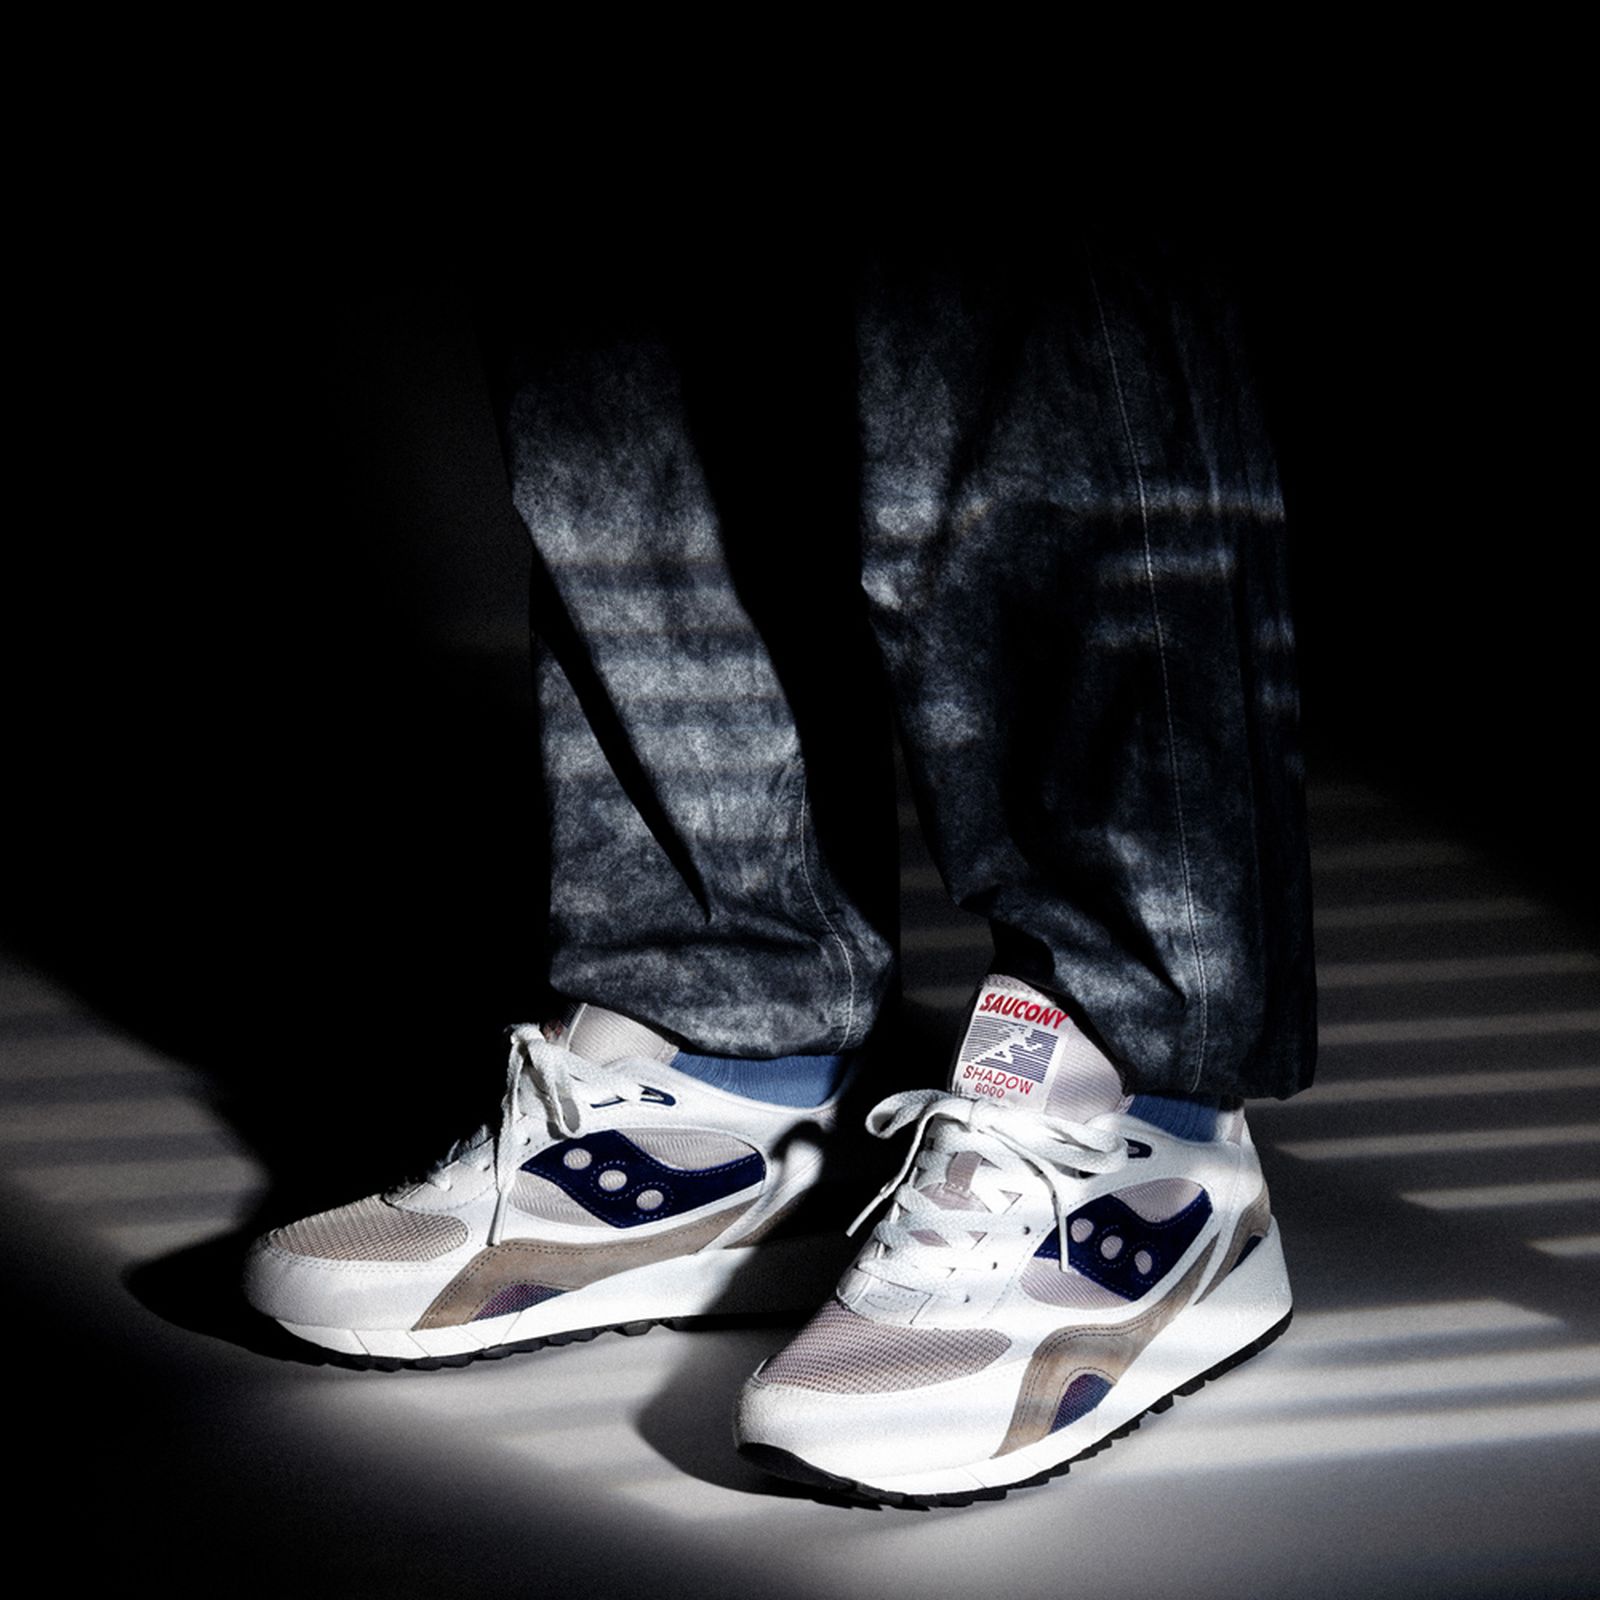 saucony-shadow-6000-relaunch-5